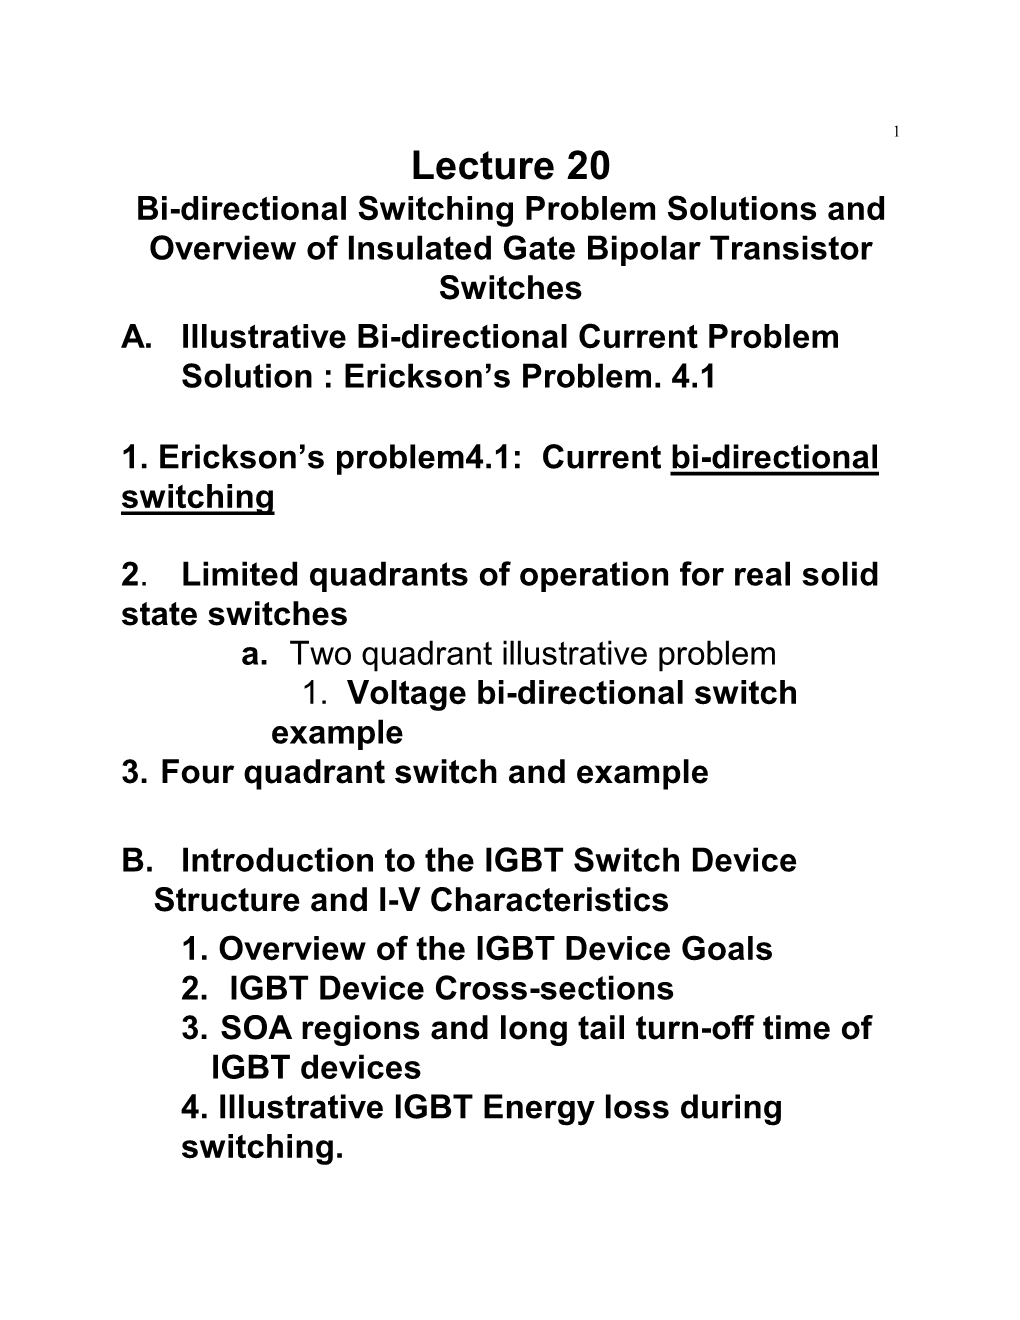 Lecture 20 Bi-Directional Switching Problem Solutions and Overview of Insulated Gate Bipolar Transistor Switches A